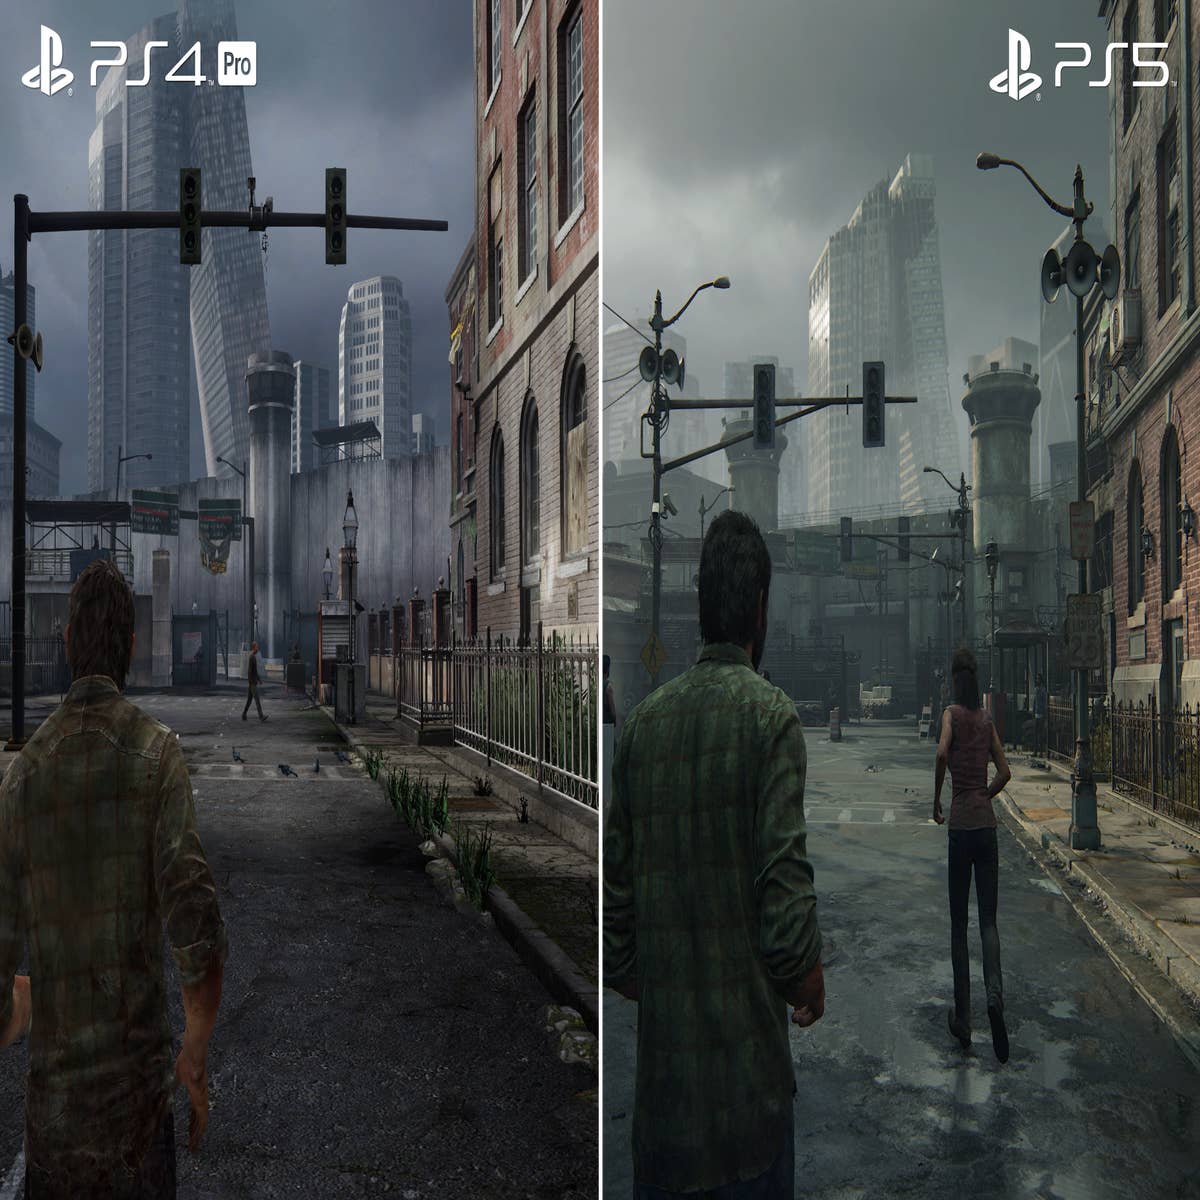 In Theory: Could The Last of Us on PS4 run at 1080p60?